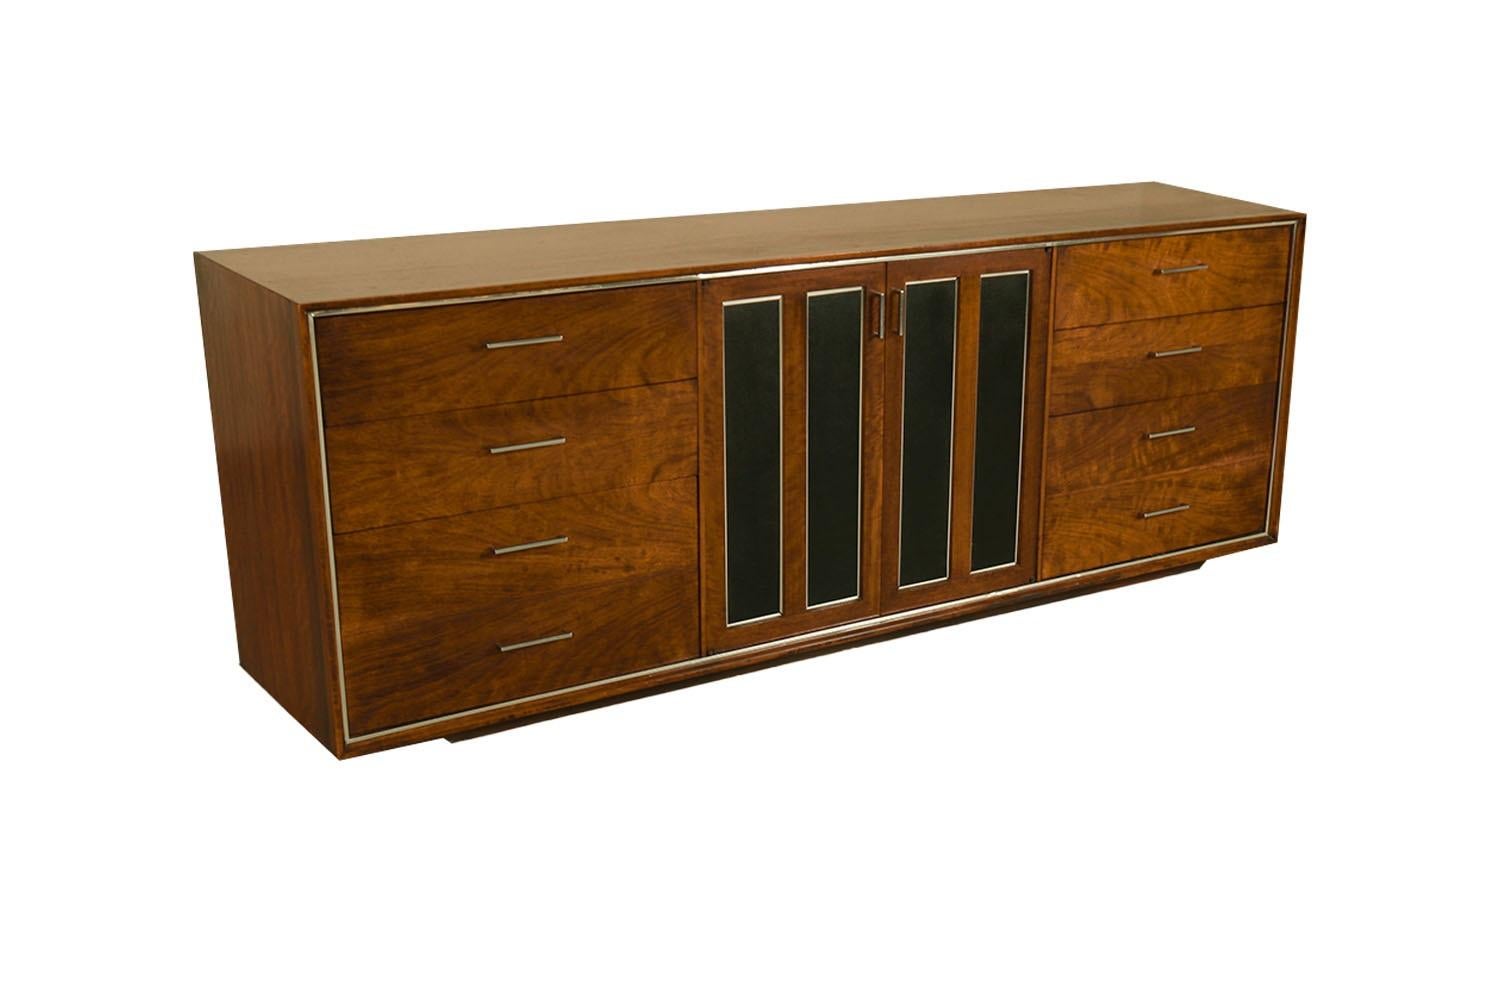 Extraordinary Mid-Century Modern 9 drawer dresser by Lane Furniture. This retro piece was constructed with top of the line hardware, and excellently crafted woodwork. Features six dovetailed drawers accented with chrome drawer pulls flanking center